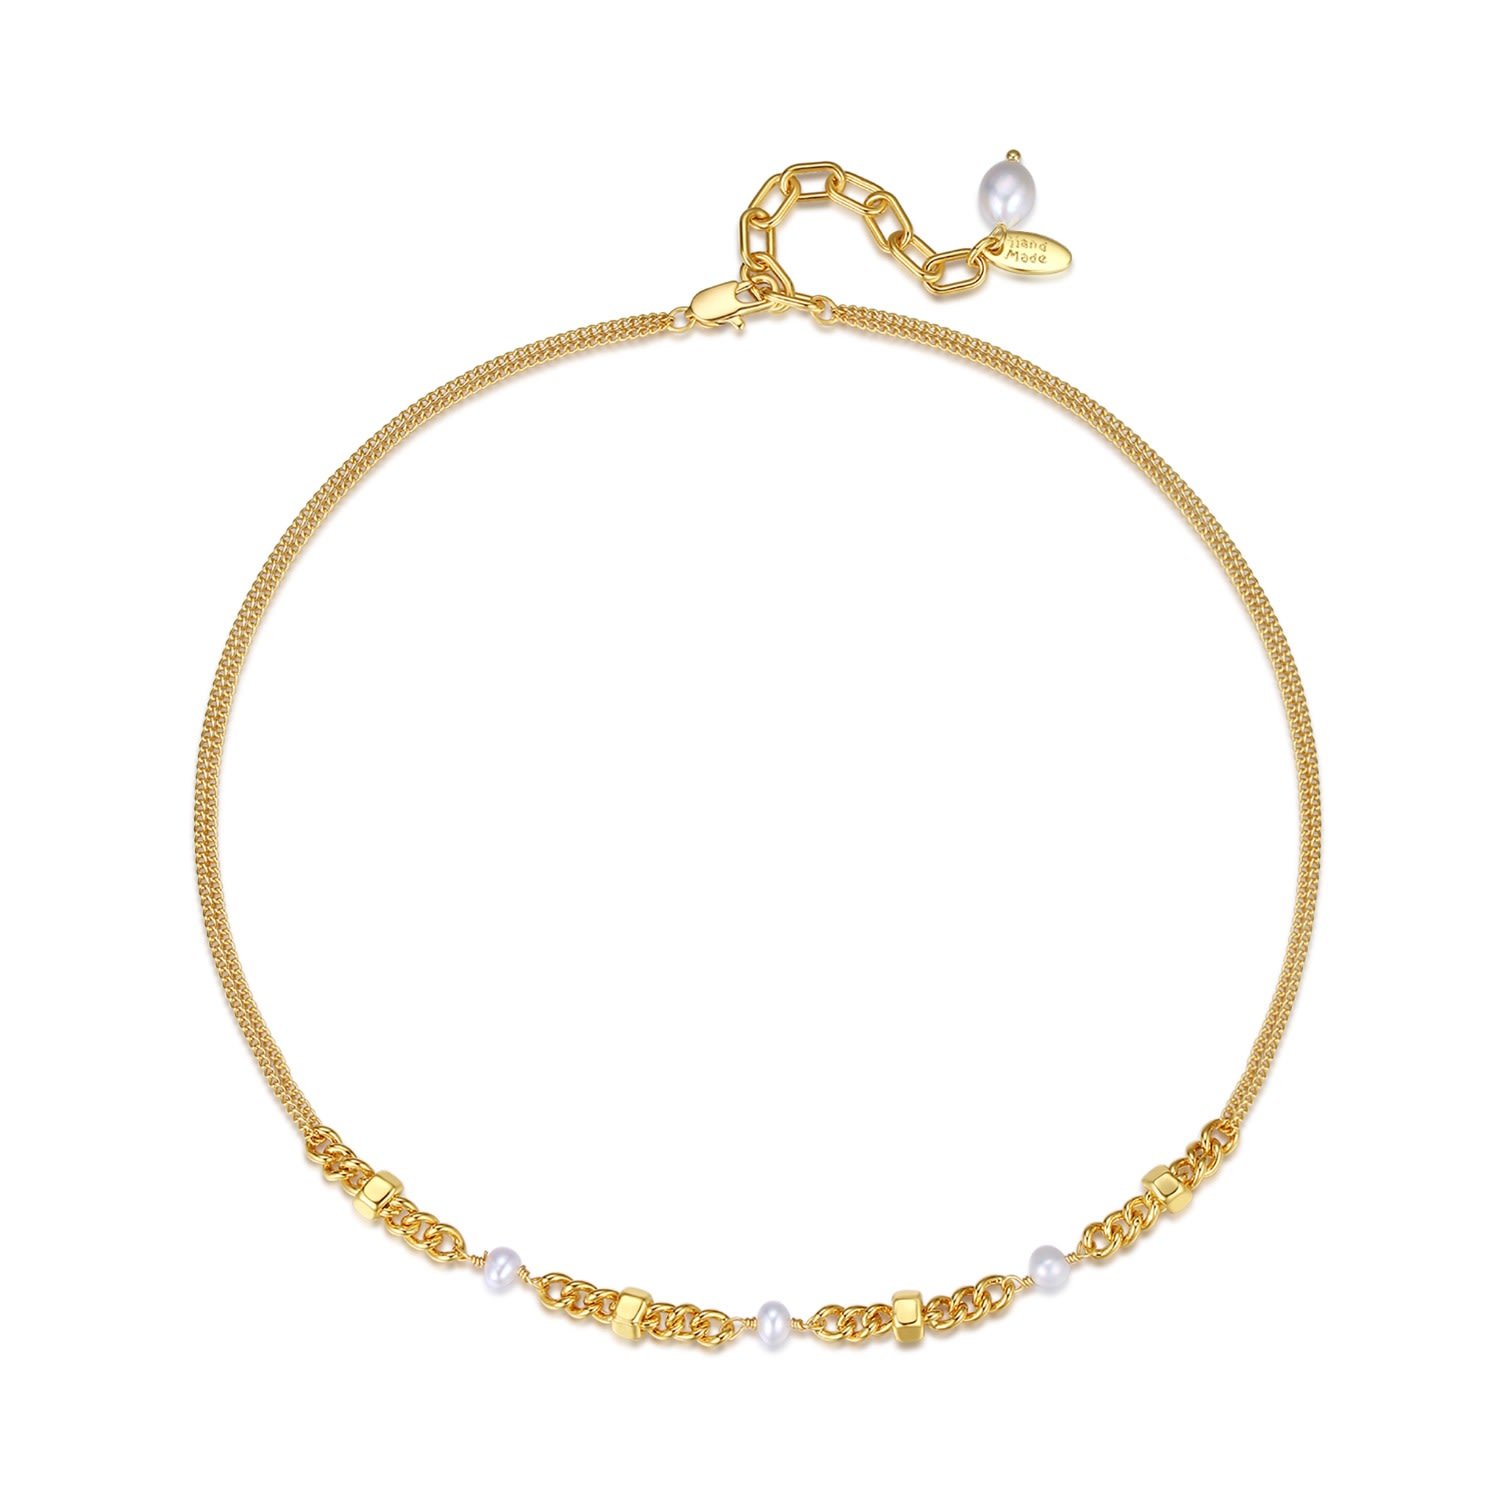 Shop Classicharms Women's Gold Double Stranded Necklace With Natural Pearls